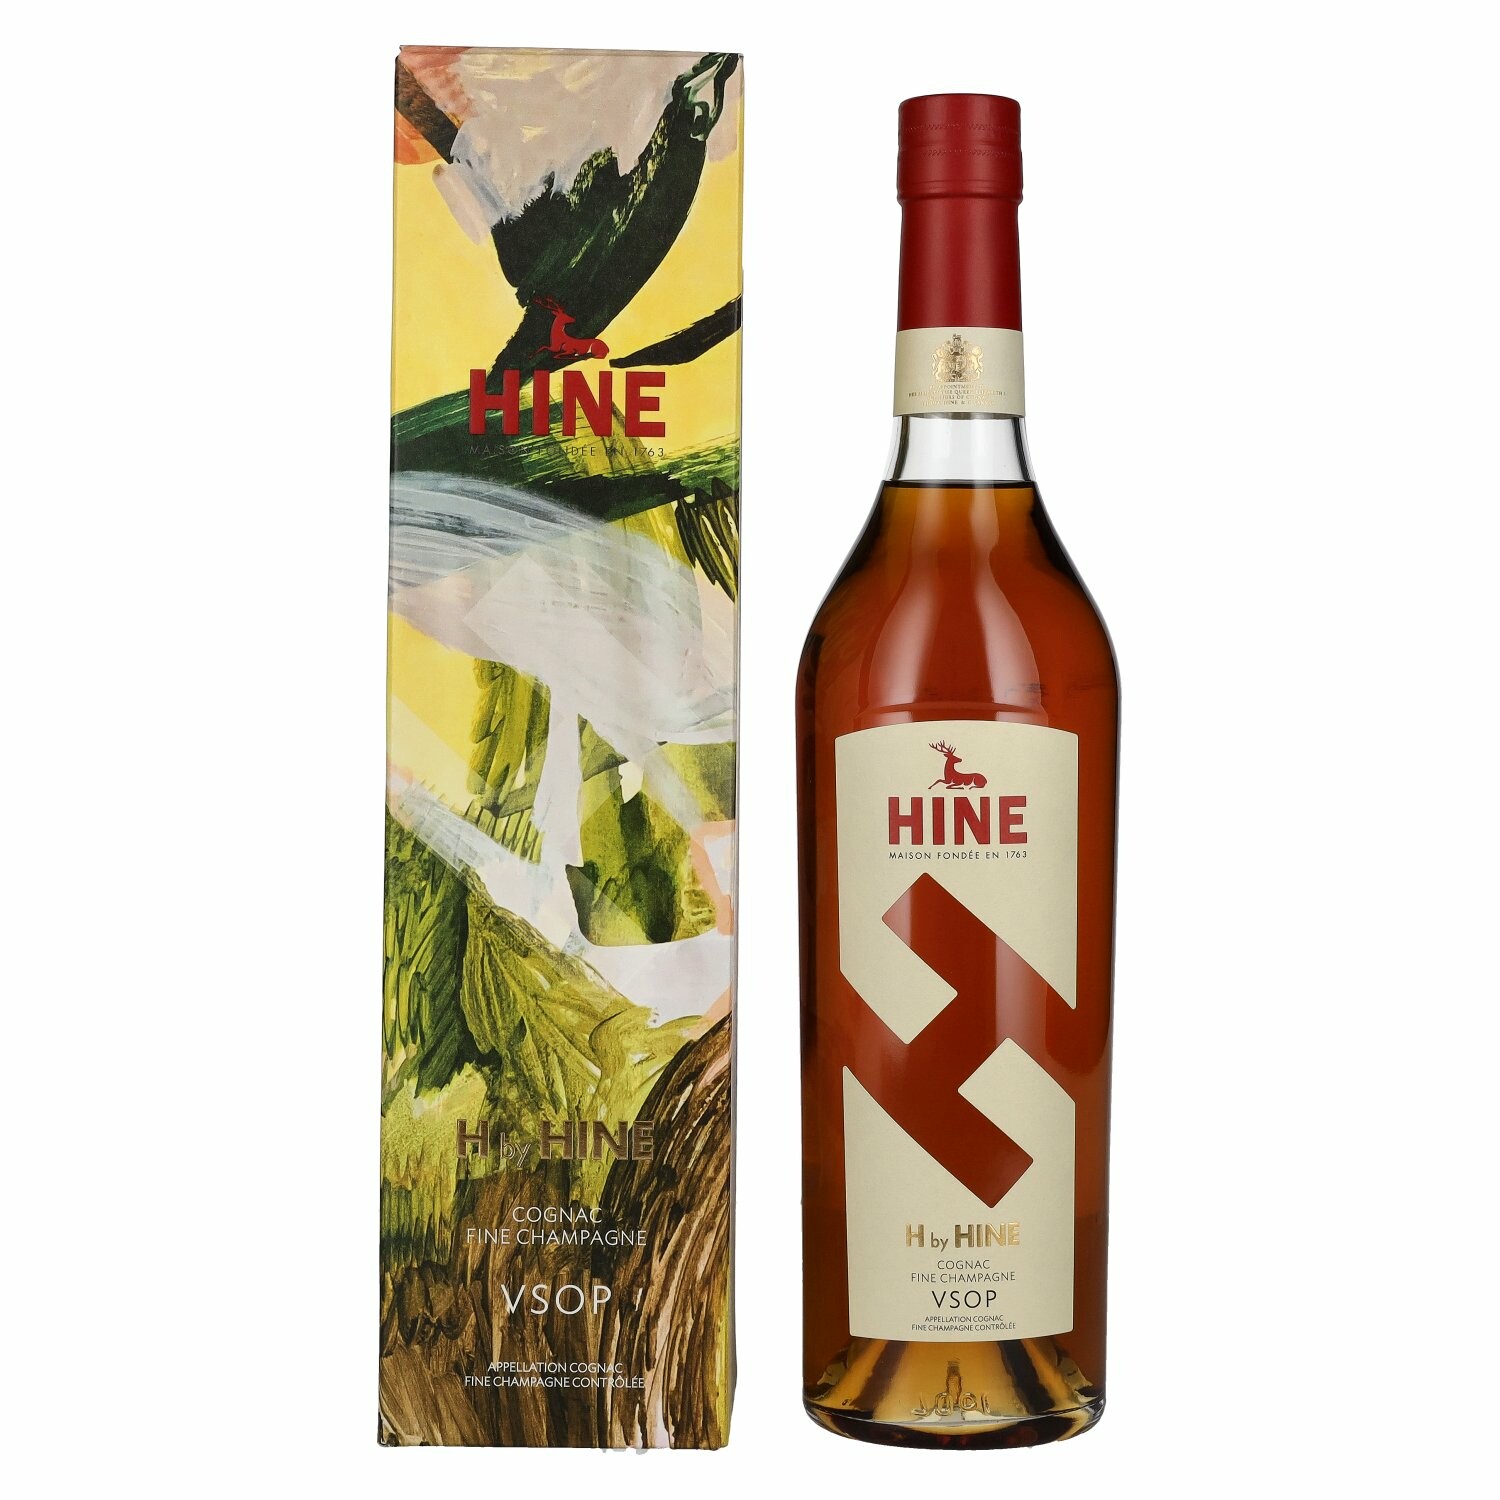 Hine H by Hine VSOP Fine Champagne Cognac Design by Luca Longhi 40% Vol. 0,7l in Giftbox